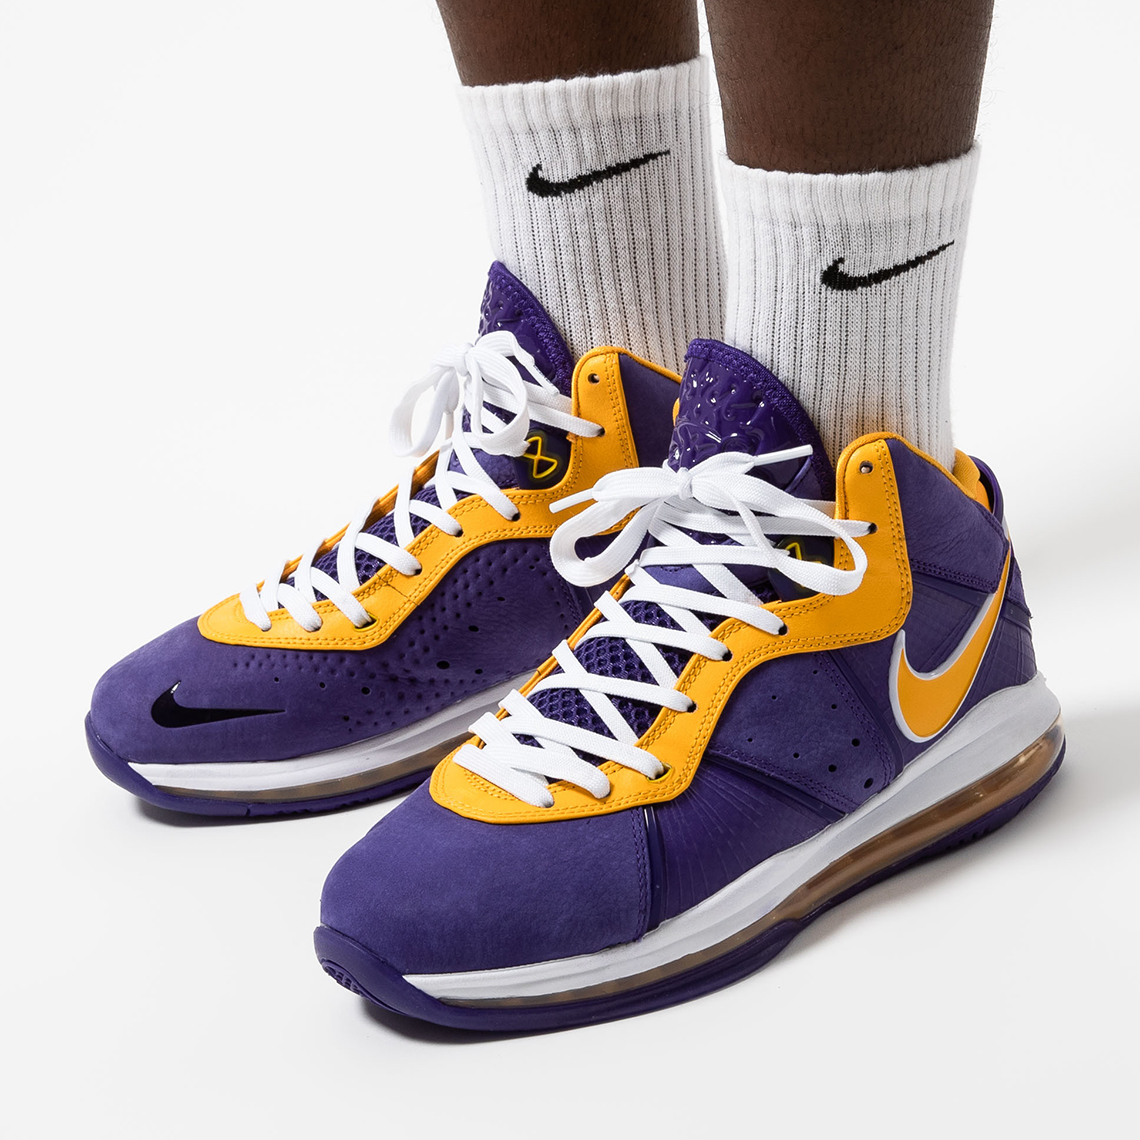 Lebron 8 Lakers Release Date